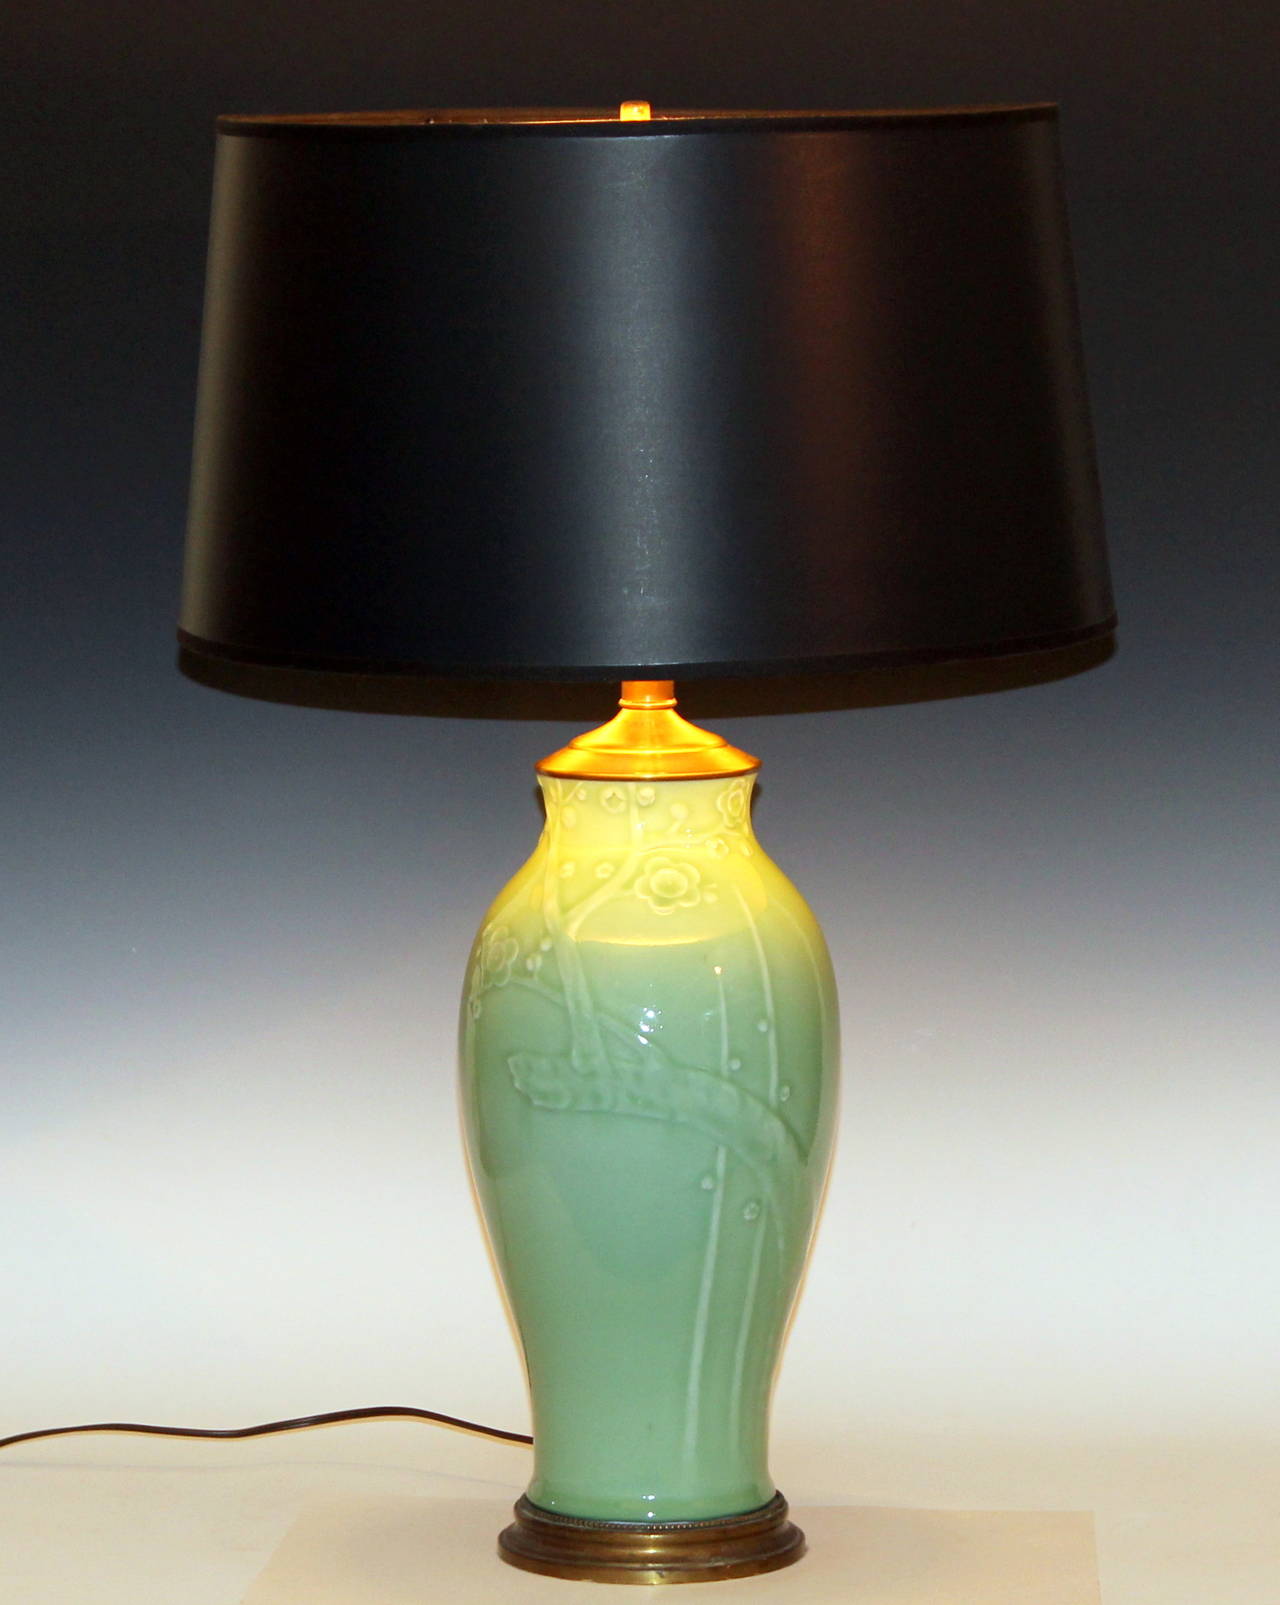 Vintage Japanese porcelain vase converted to lamp with carved plum blossoms and light green celadon glaze. Circa 1960's. 3 way switch. 29